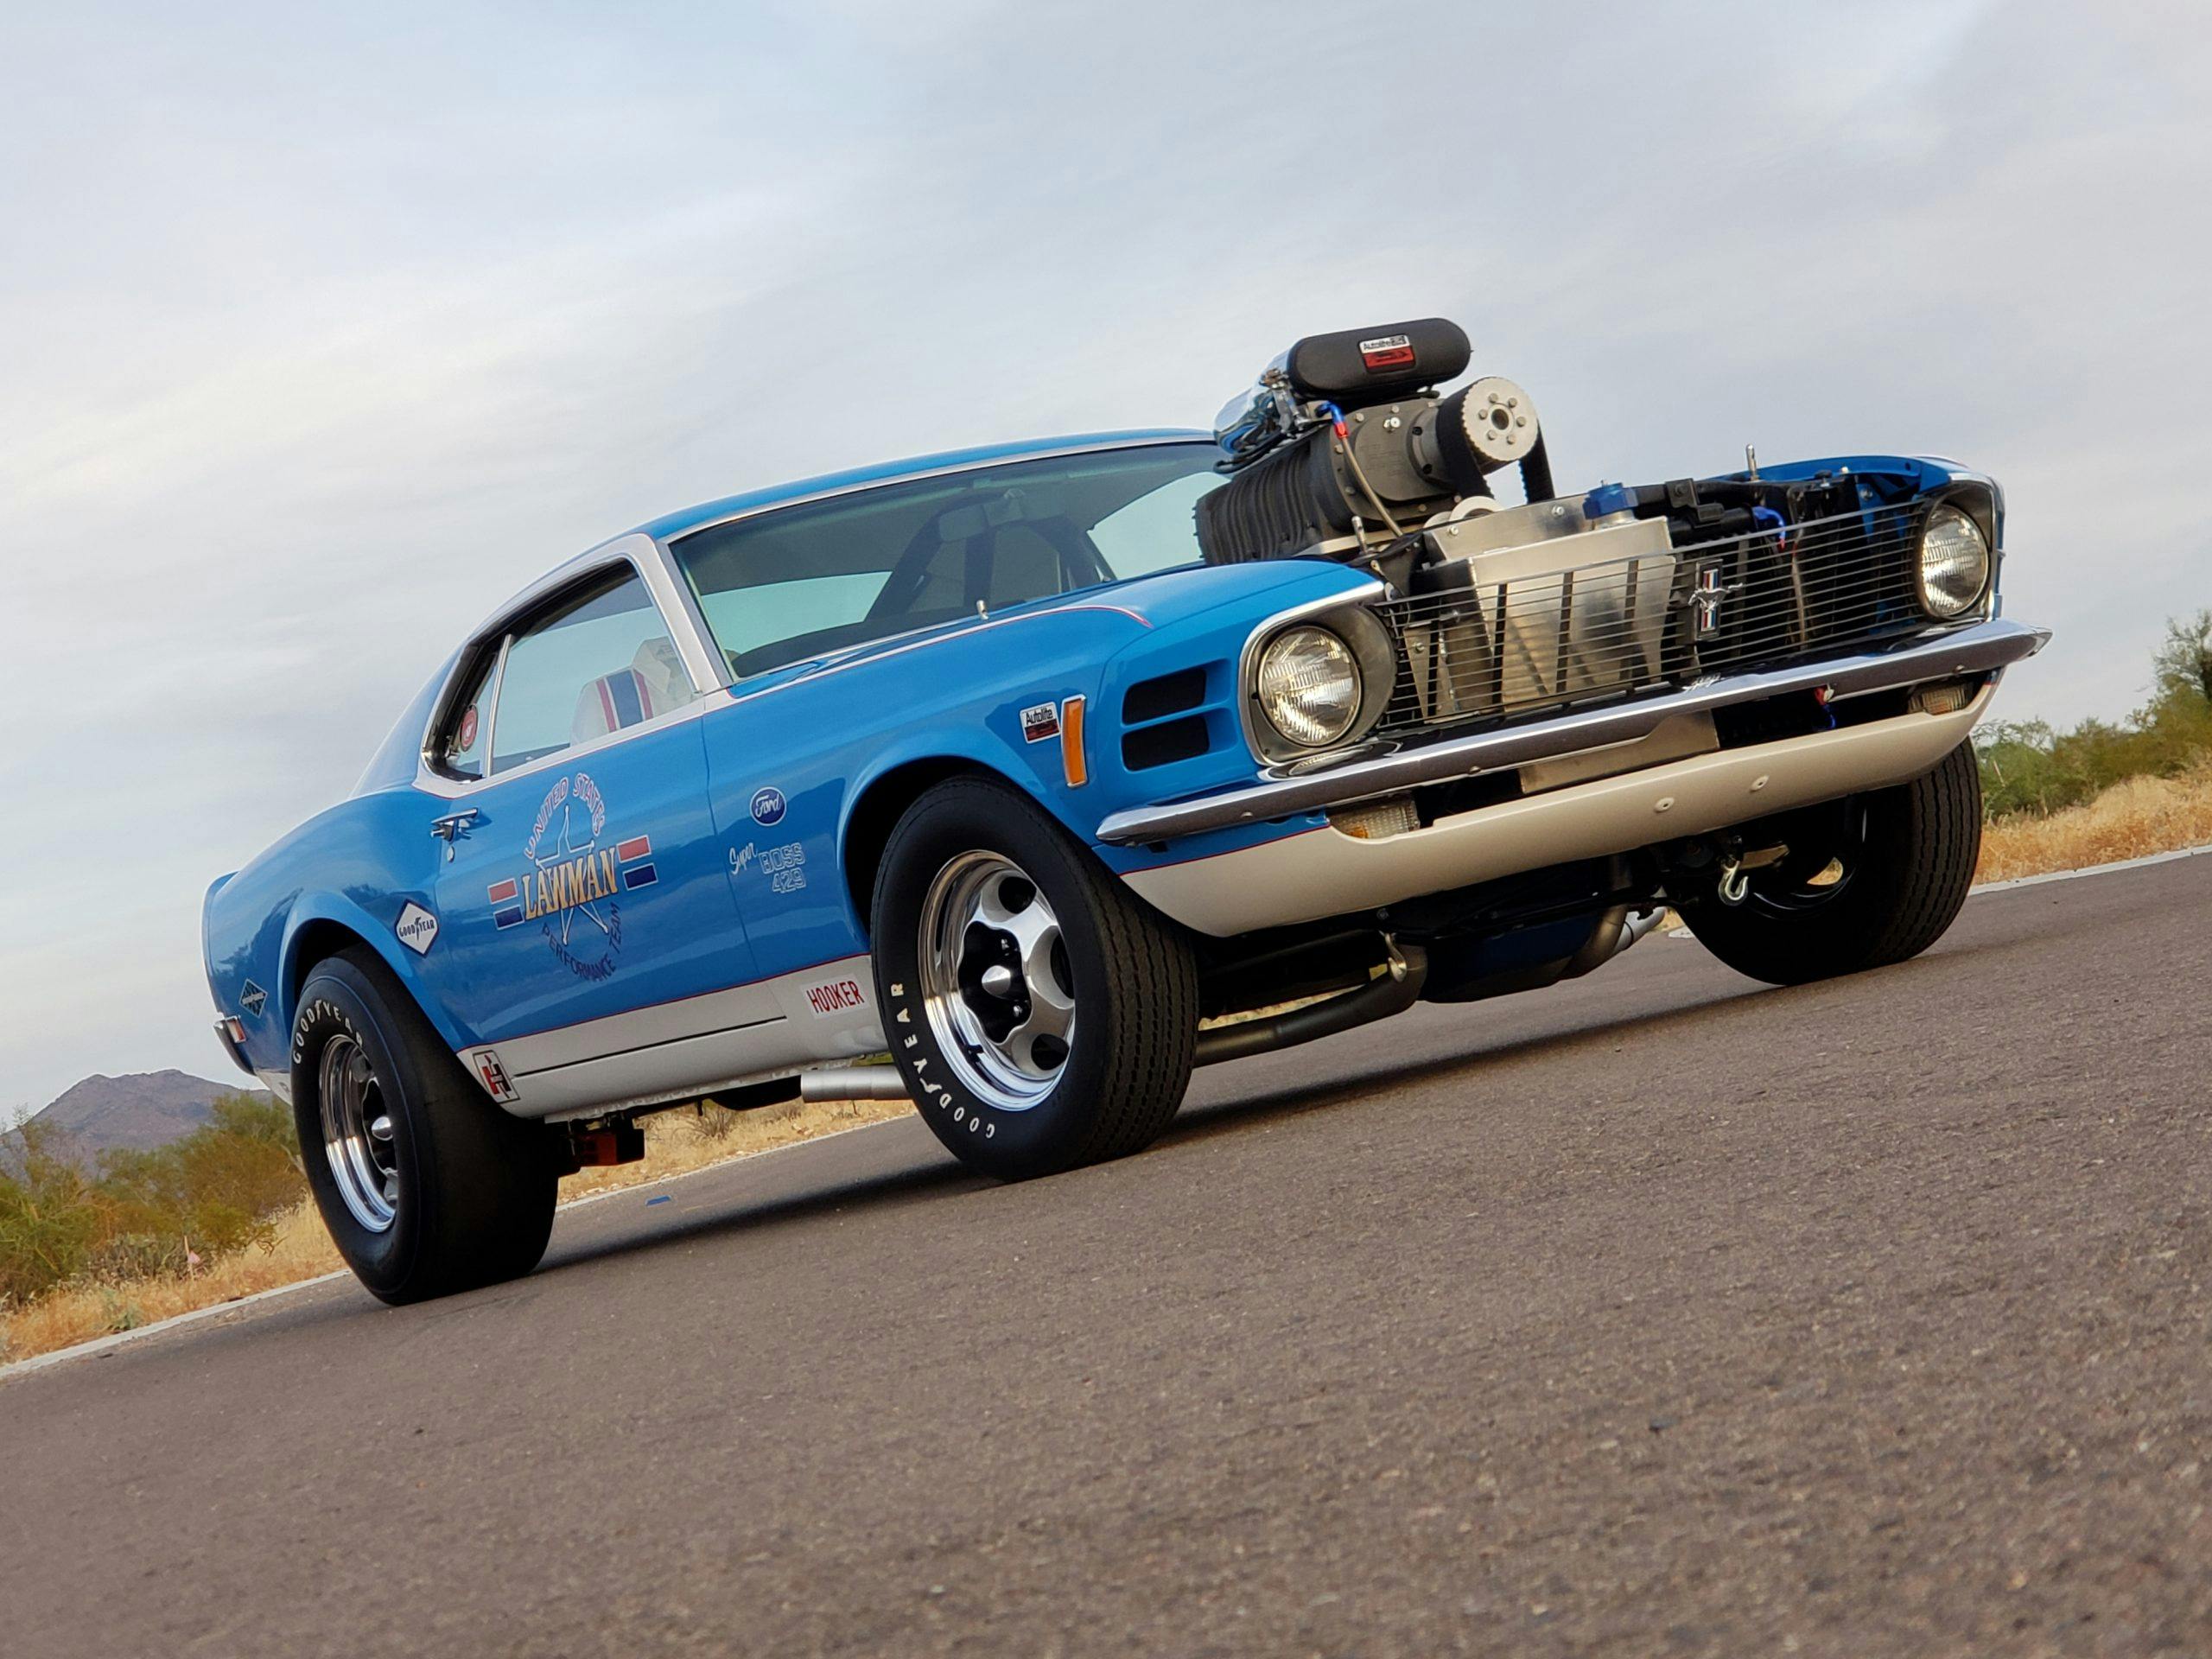 Lawman Mustang: The Boss 429 sent to war in the -